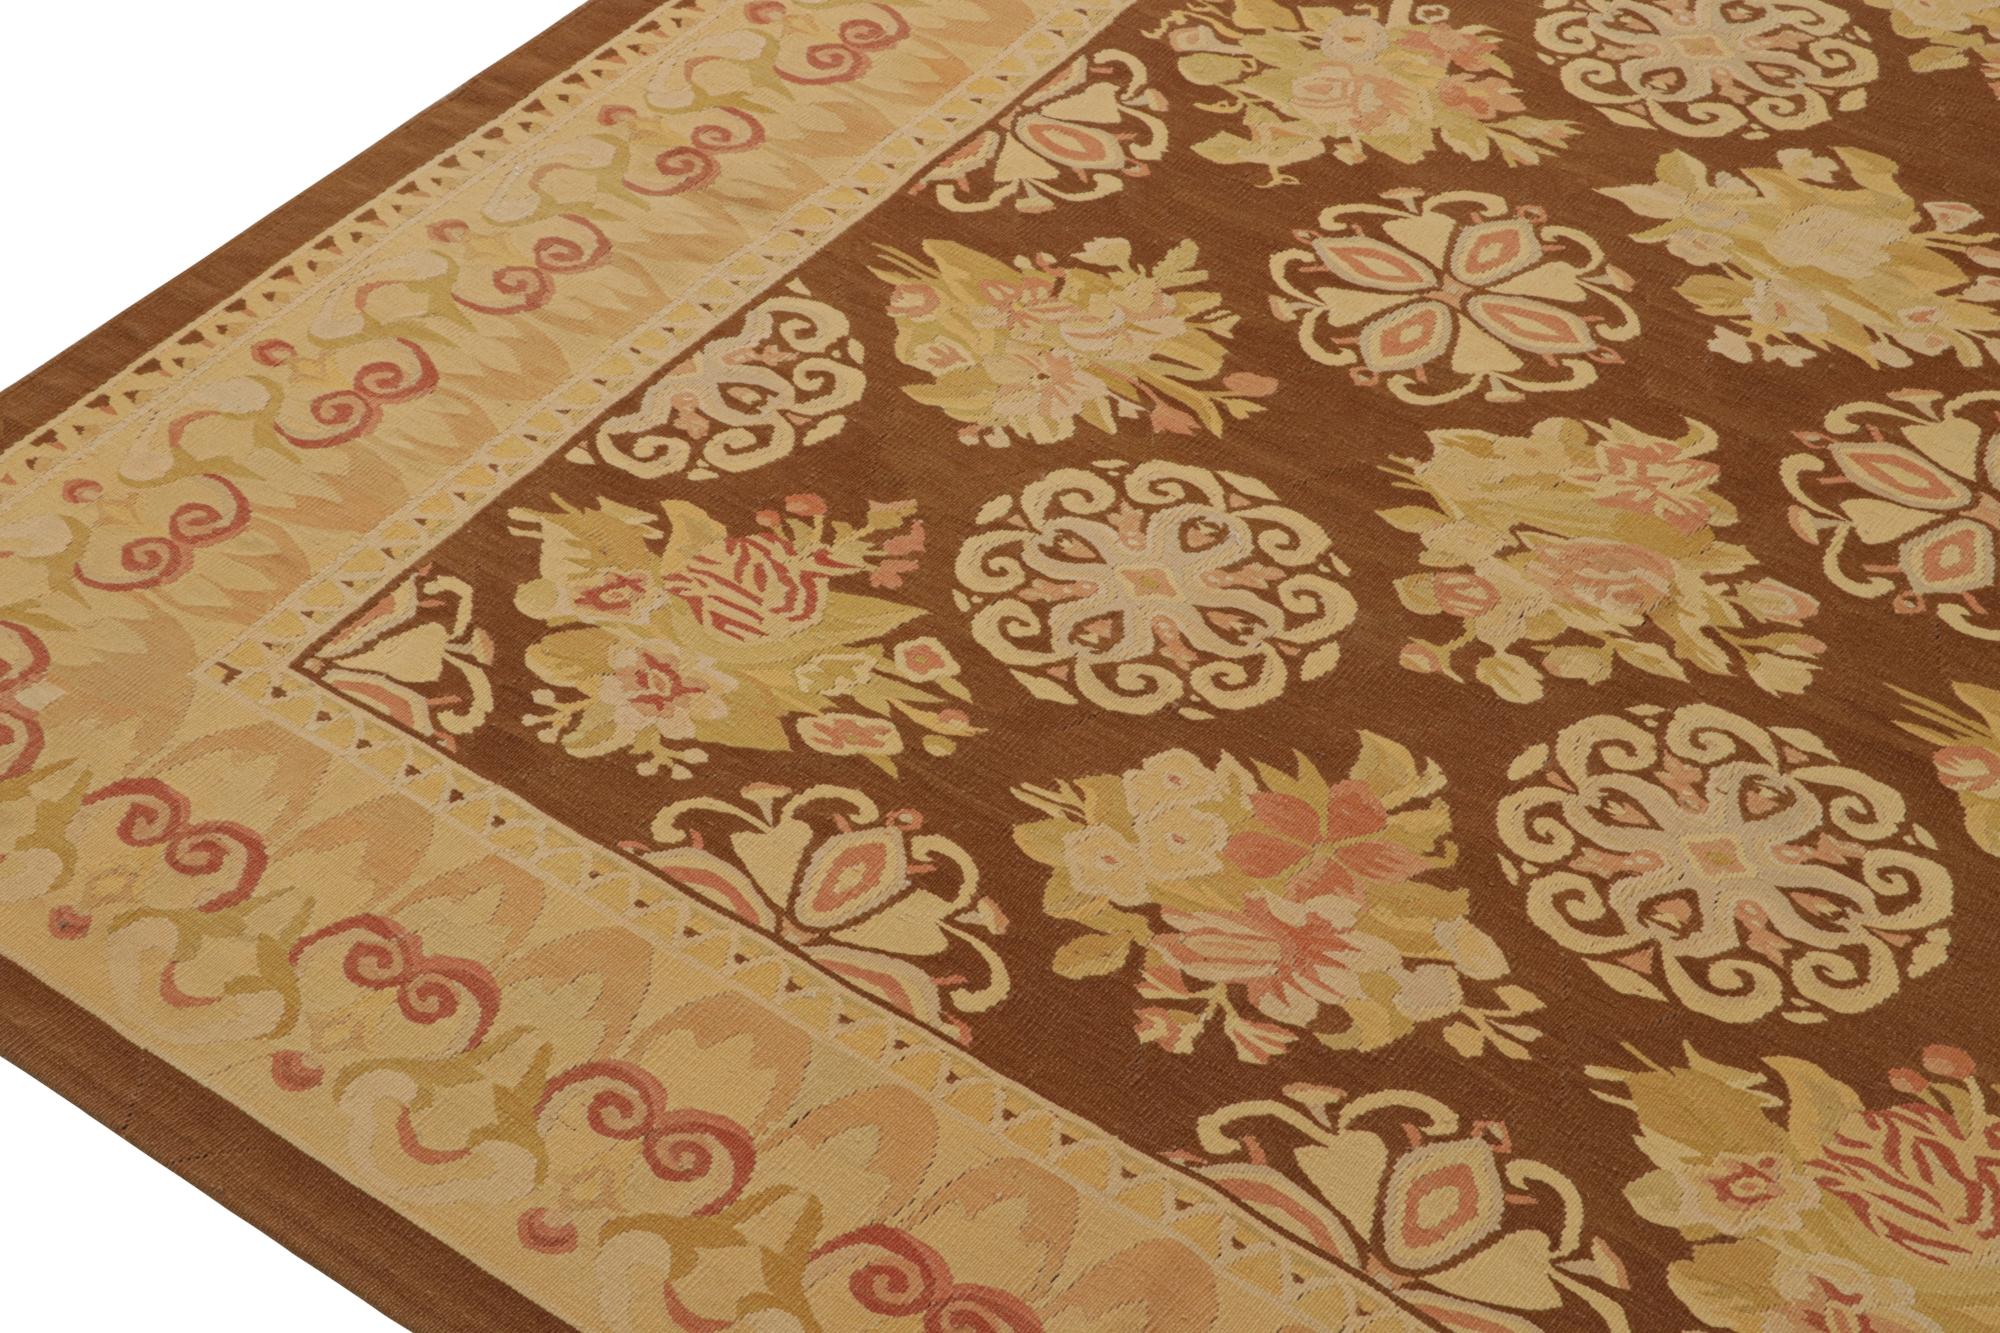 Wool Rug & Kilim’s Aubusson Flatweave Style Rug in Brown with Beige Floral Patterns For Sale